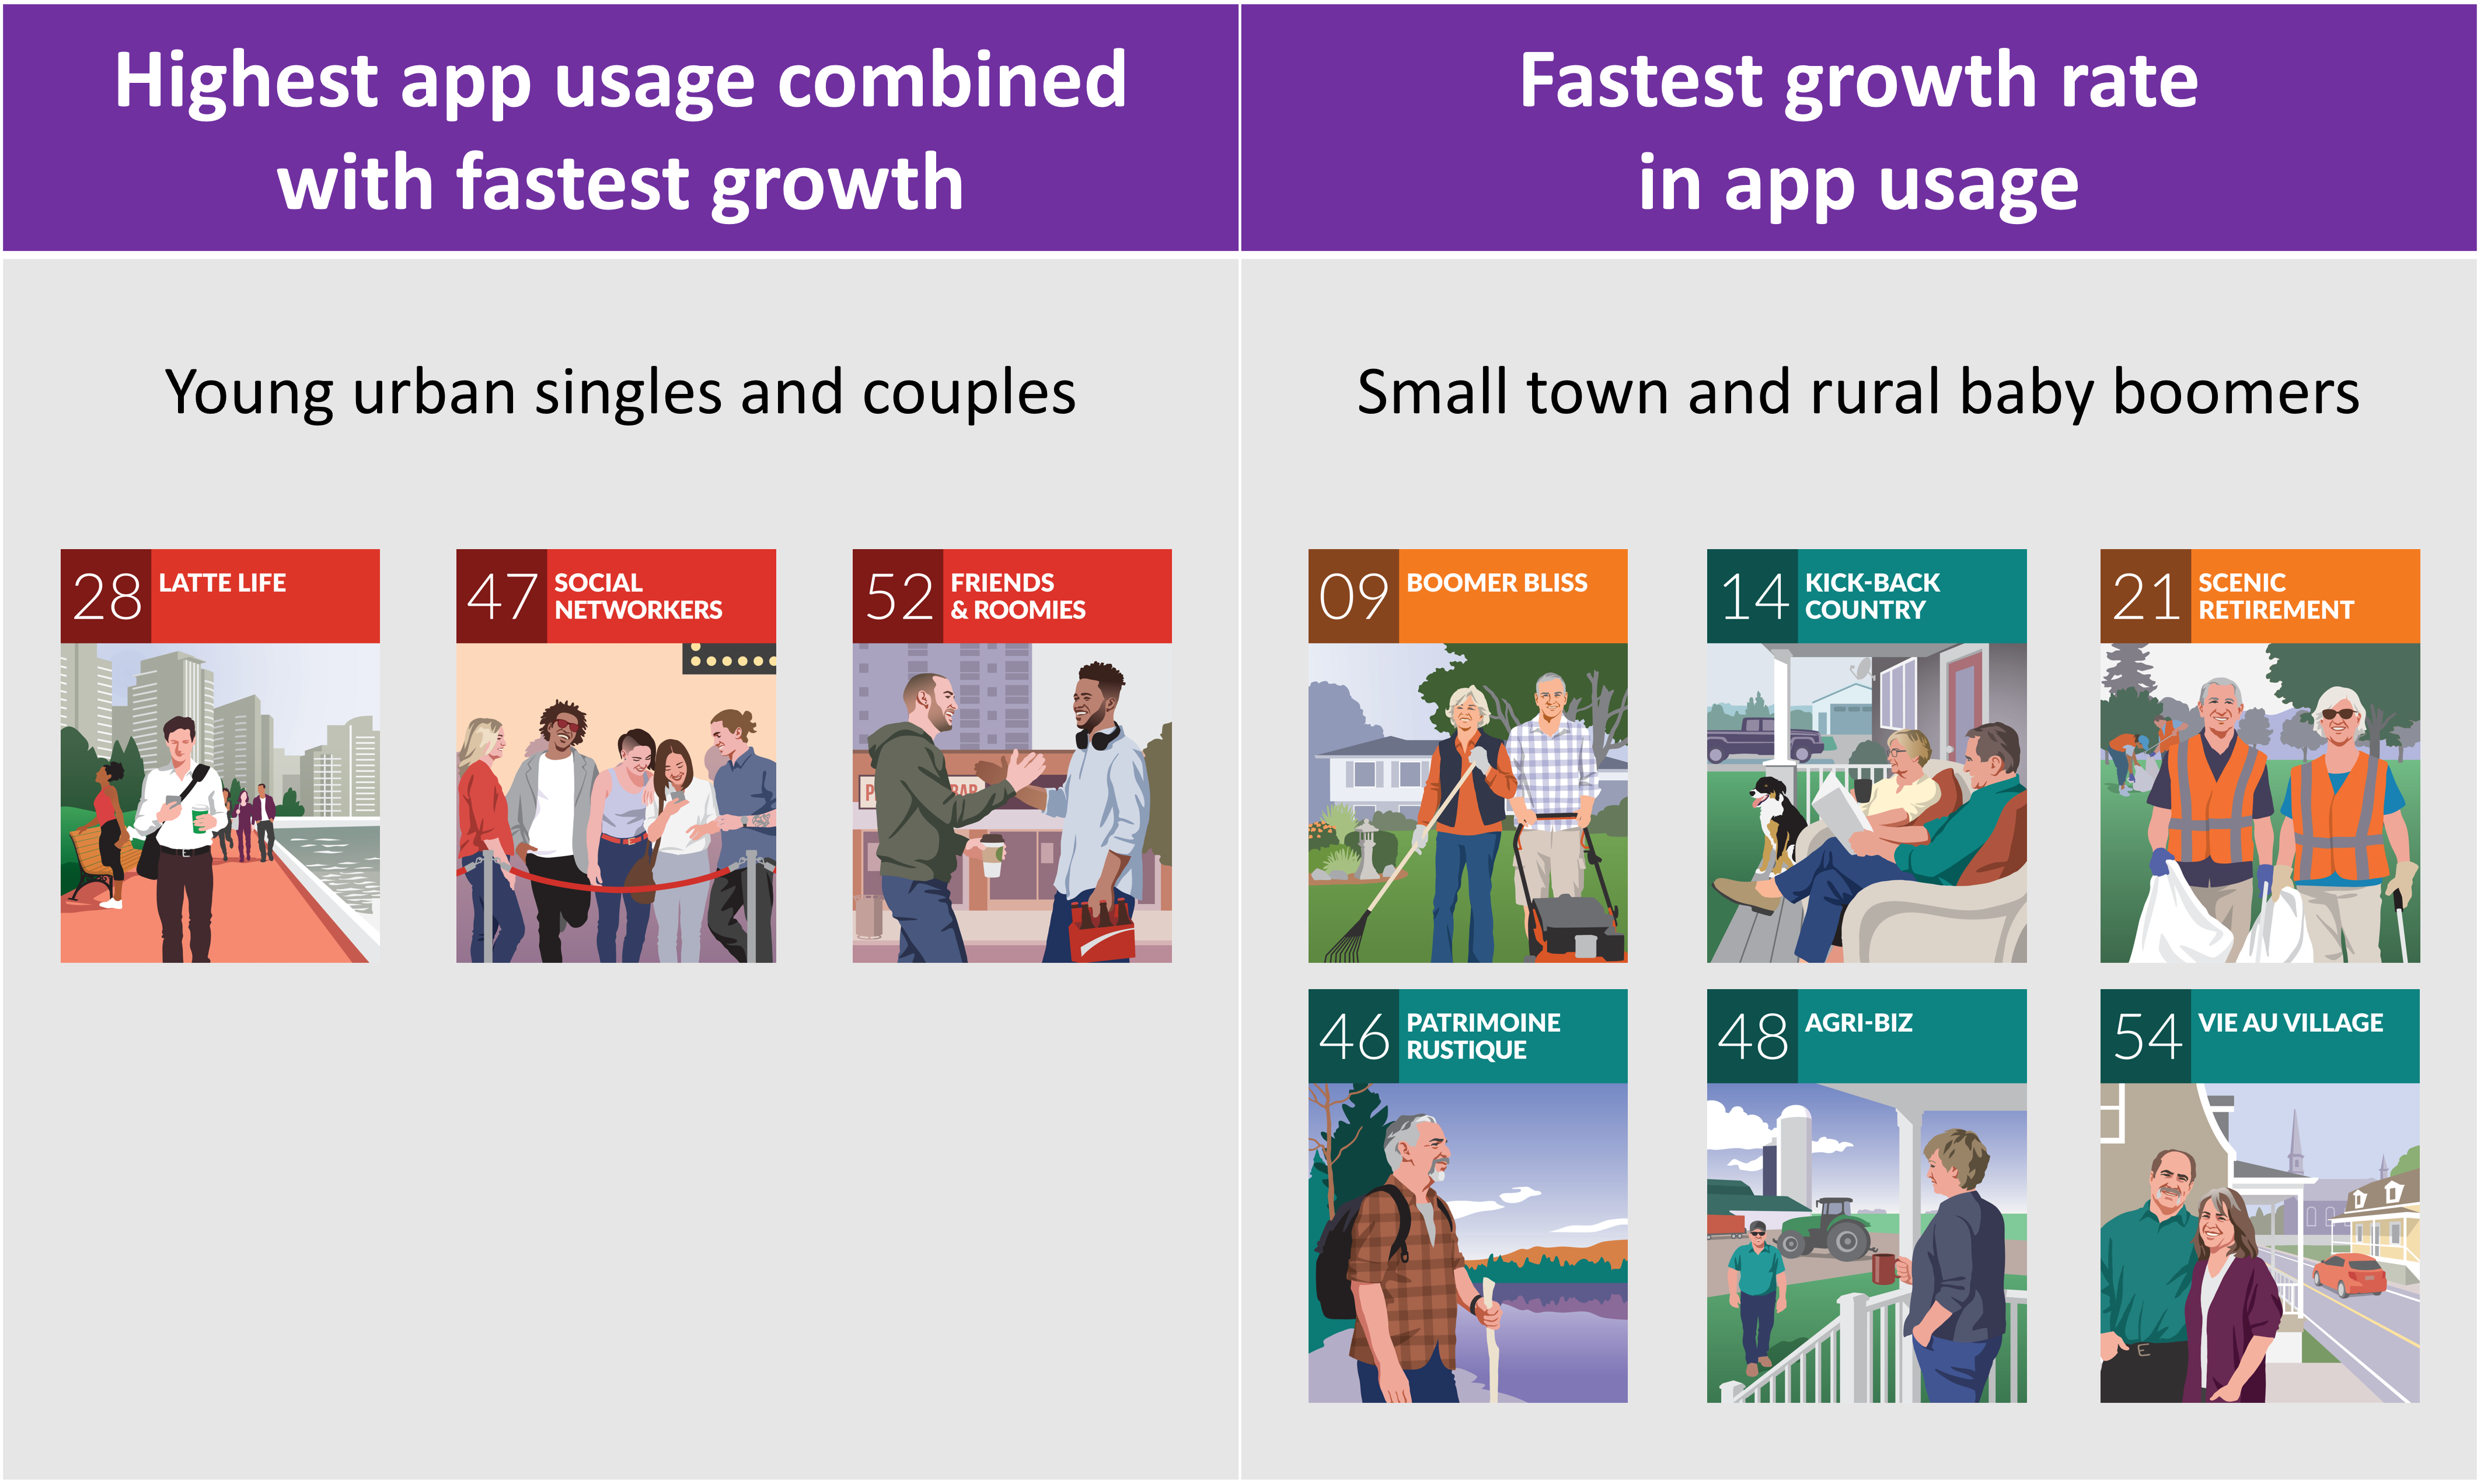 An image showing two PRIZM segment groups: one with young and urban singles and couples showing high app usage combined with fastest growth vs. small town and rural baby boomers showing the fastest growth rate in app usage.